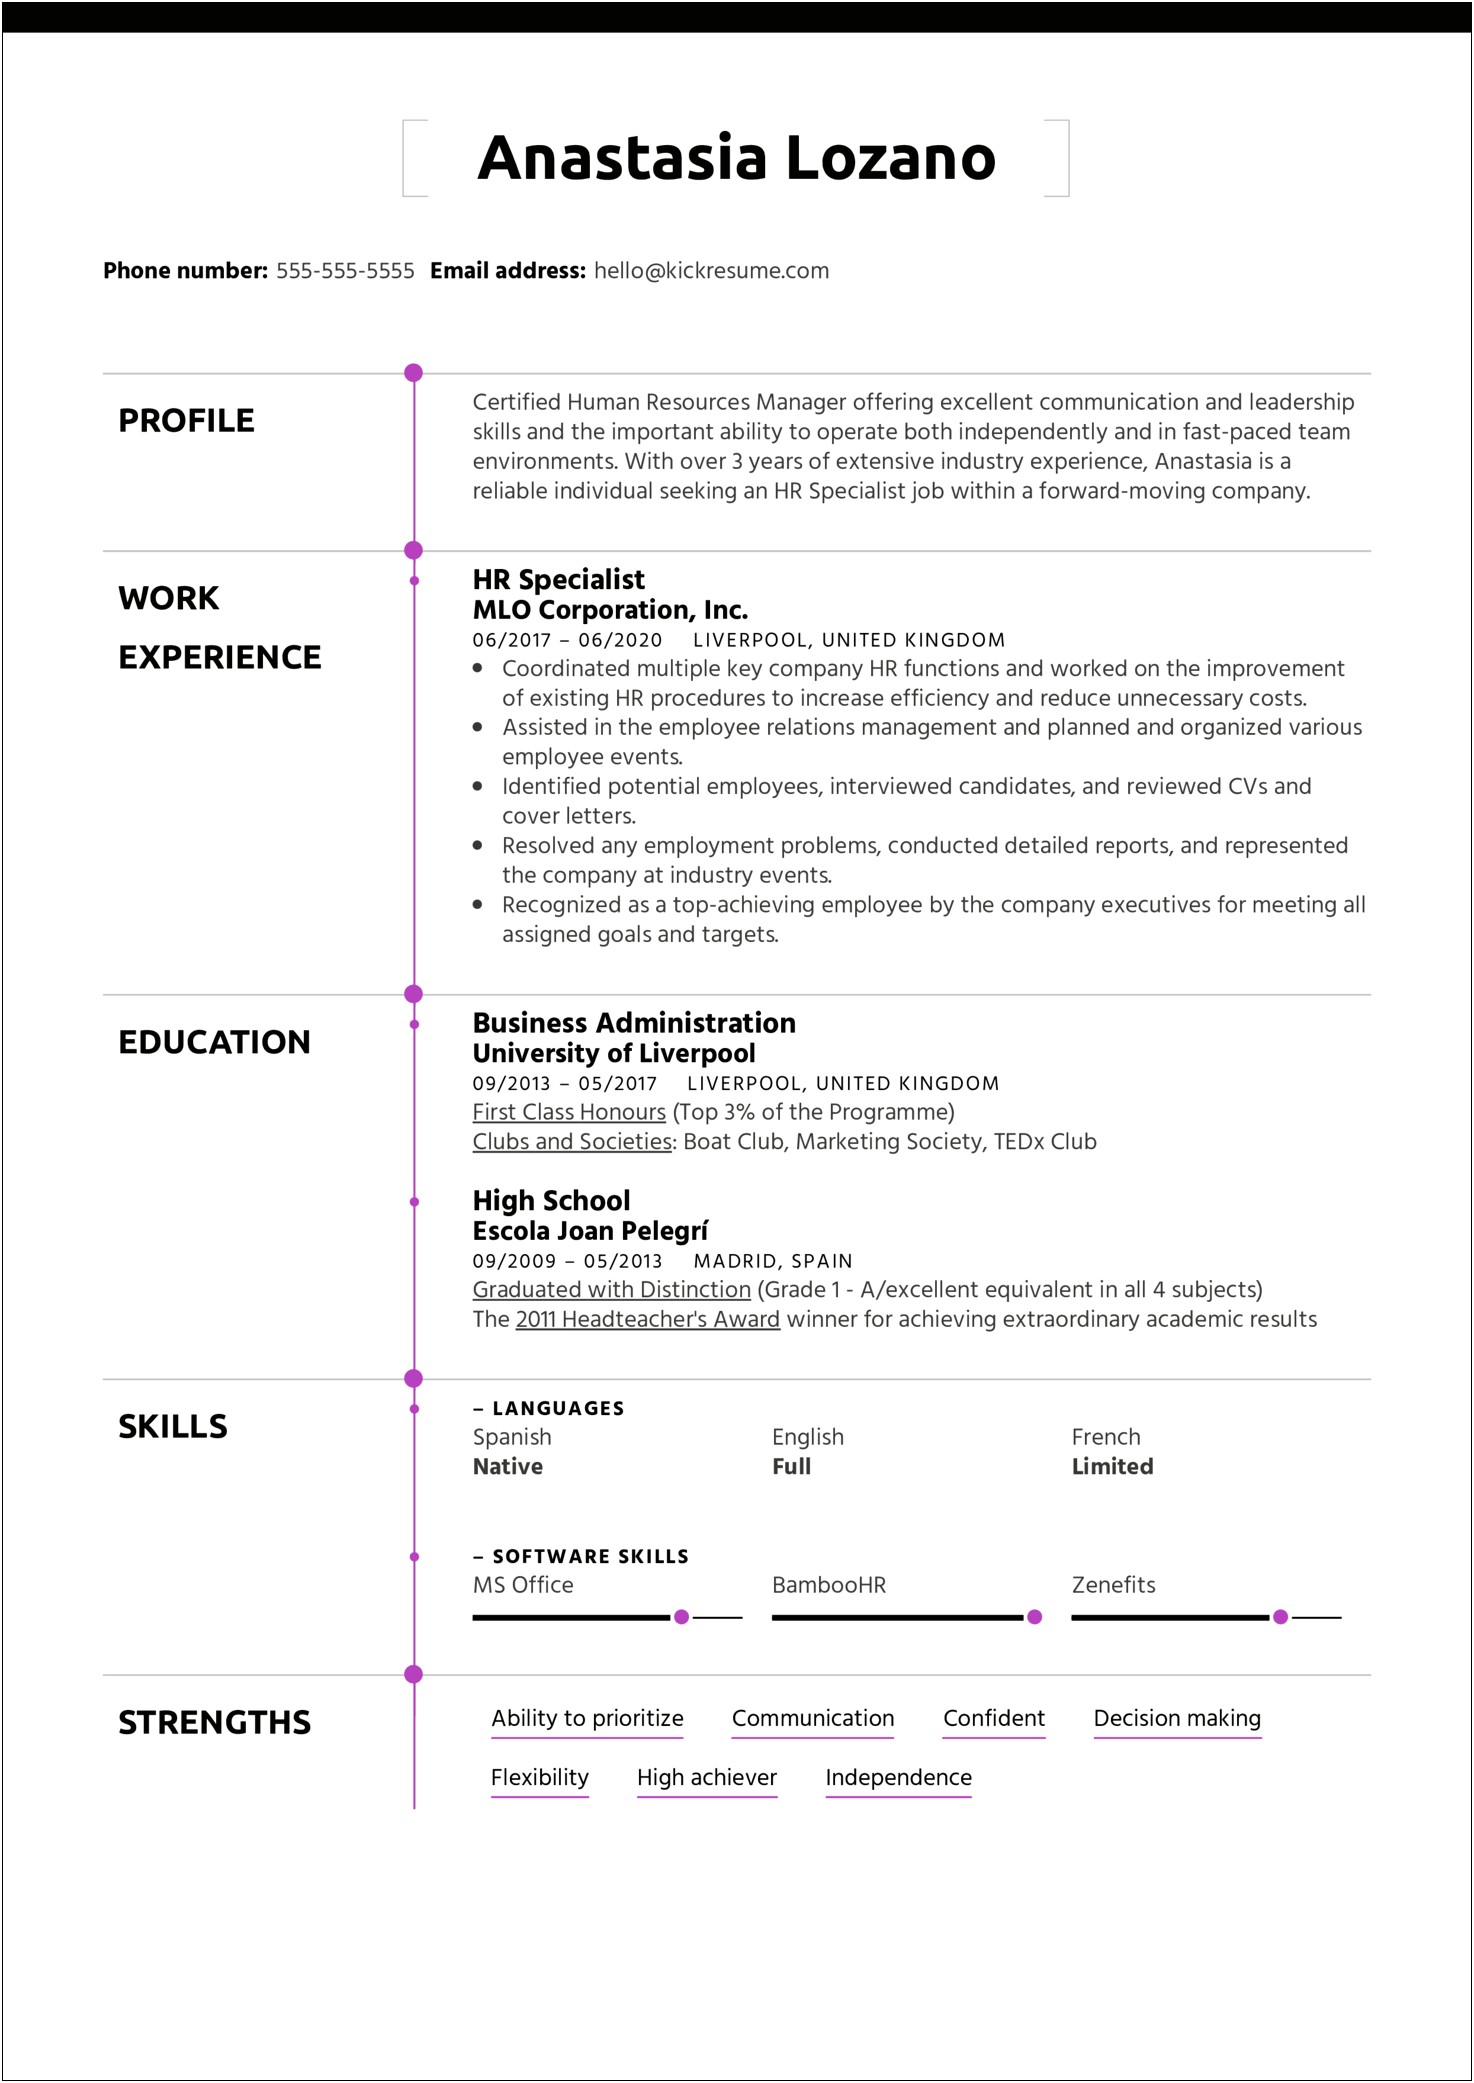 Employee Relations Specialist Resume Objective